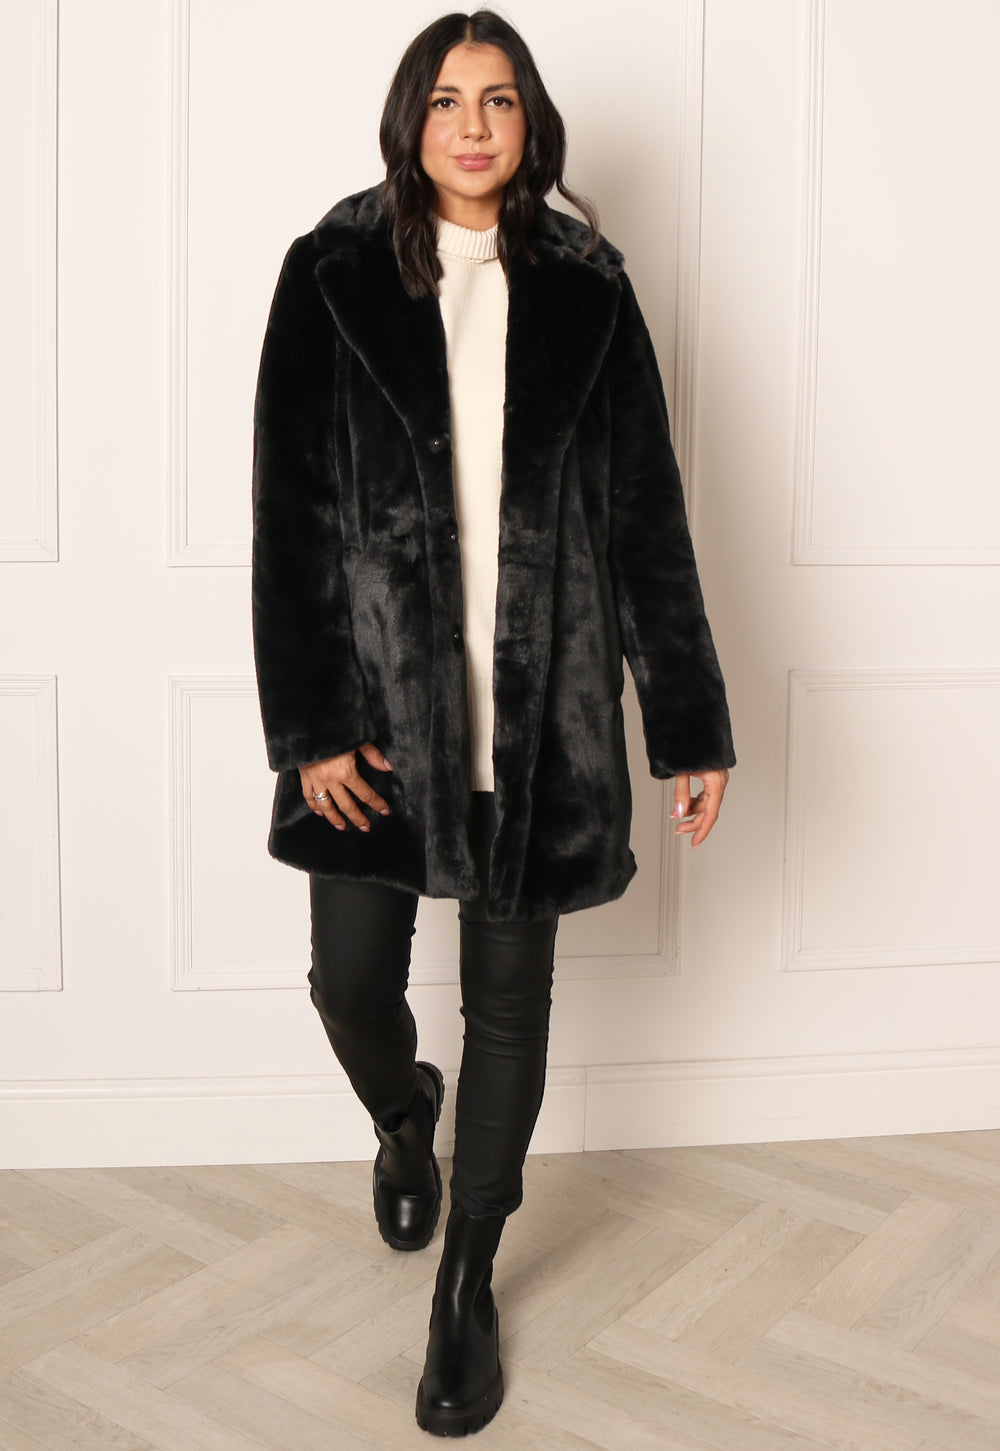 VILA New Ebba Vintage Style Faux Fur Midi Coat with Collar in Black - One Nation Clothing